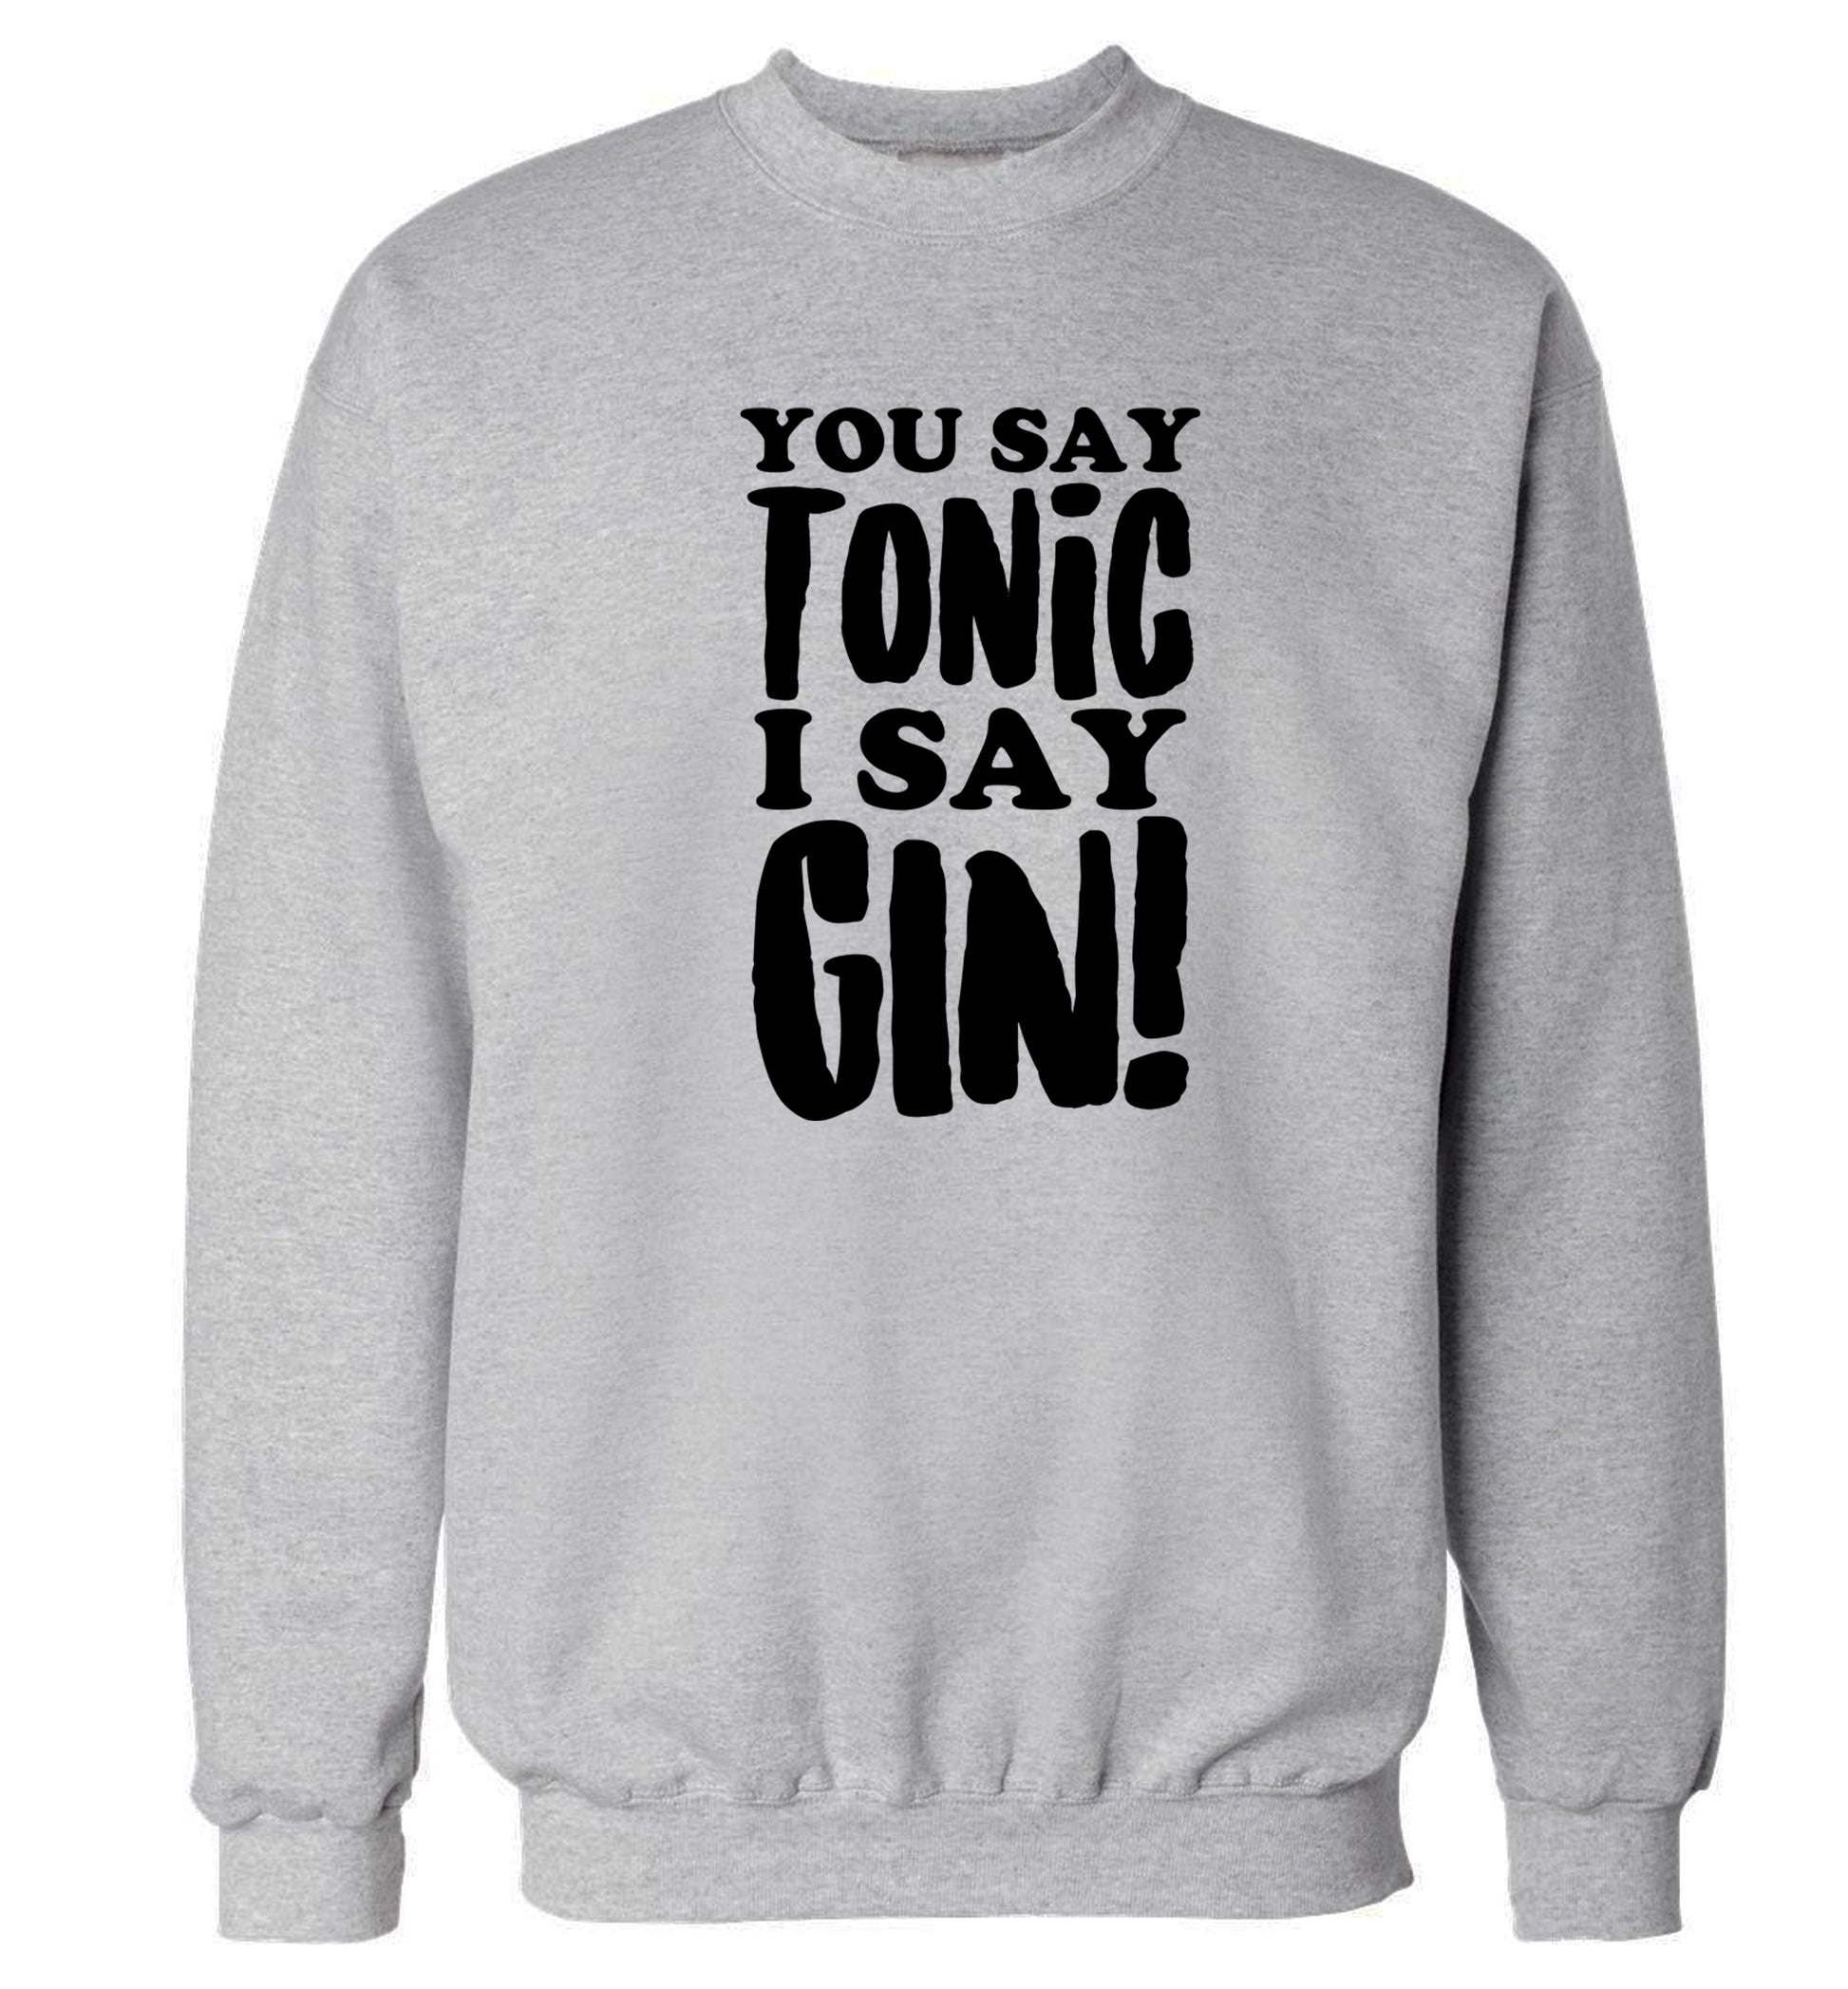 You say tonic I say gin! Adult's unisex grey Sweater 2XL